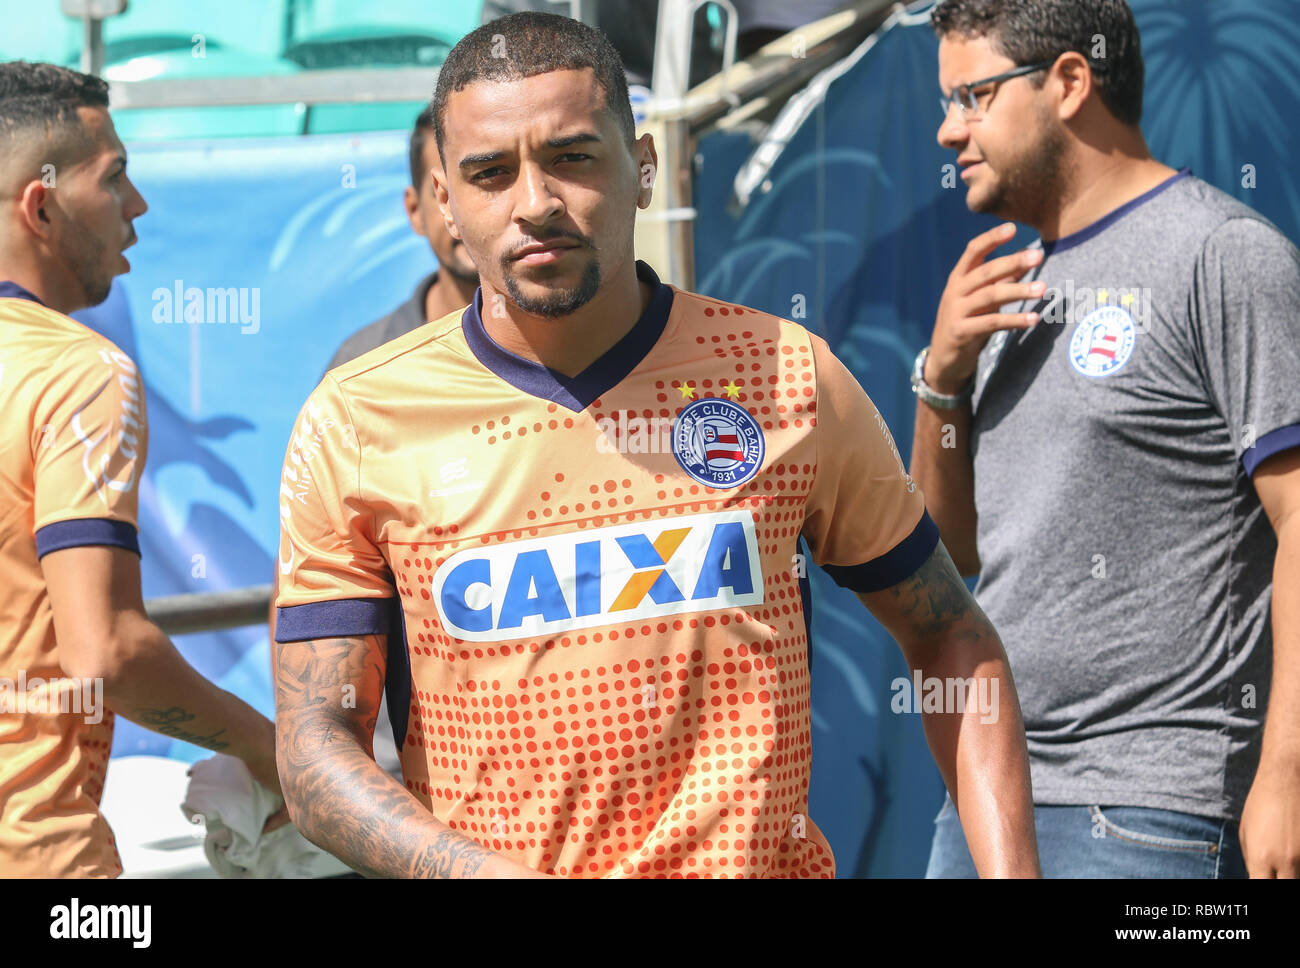 Salvador, Brazil. 12th Jan, 2019. Gregore, a player from Bahia, during a training session held on Saturday (12) at the Fonte Nova Arena in Salvador, Bahia. Credit: Tiago Caldas/FotoArena/Alamy Live News Stock Photo